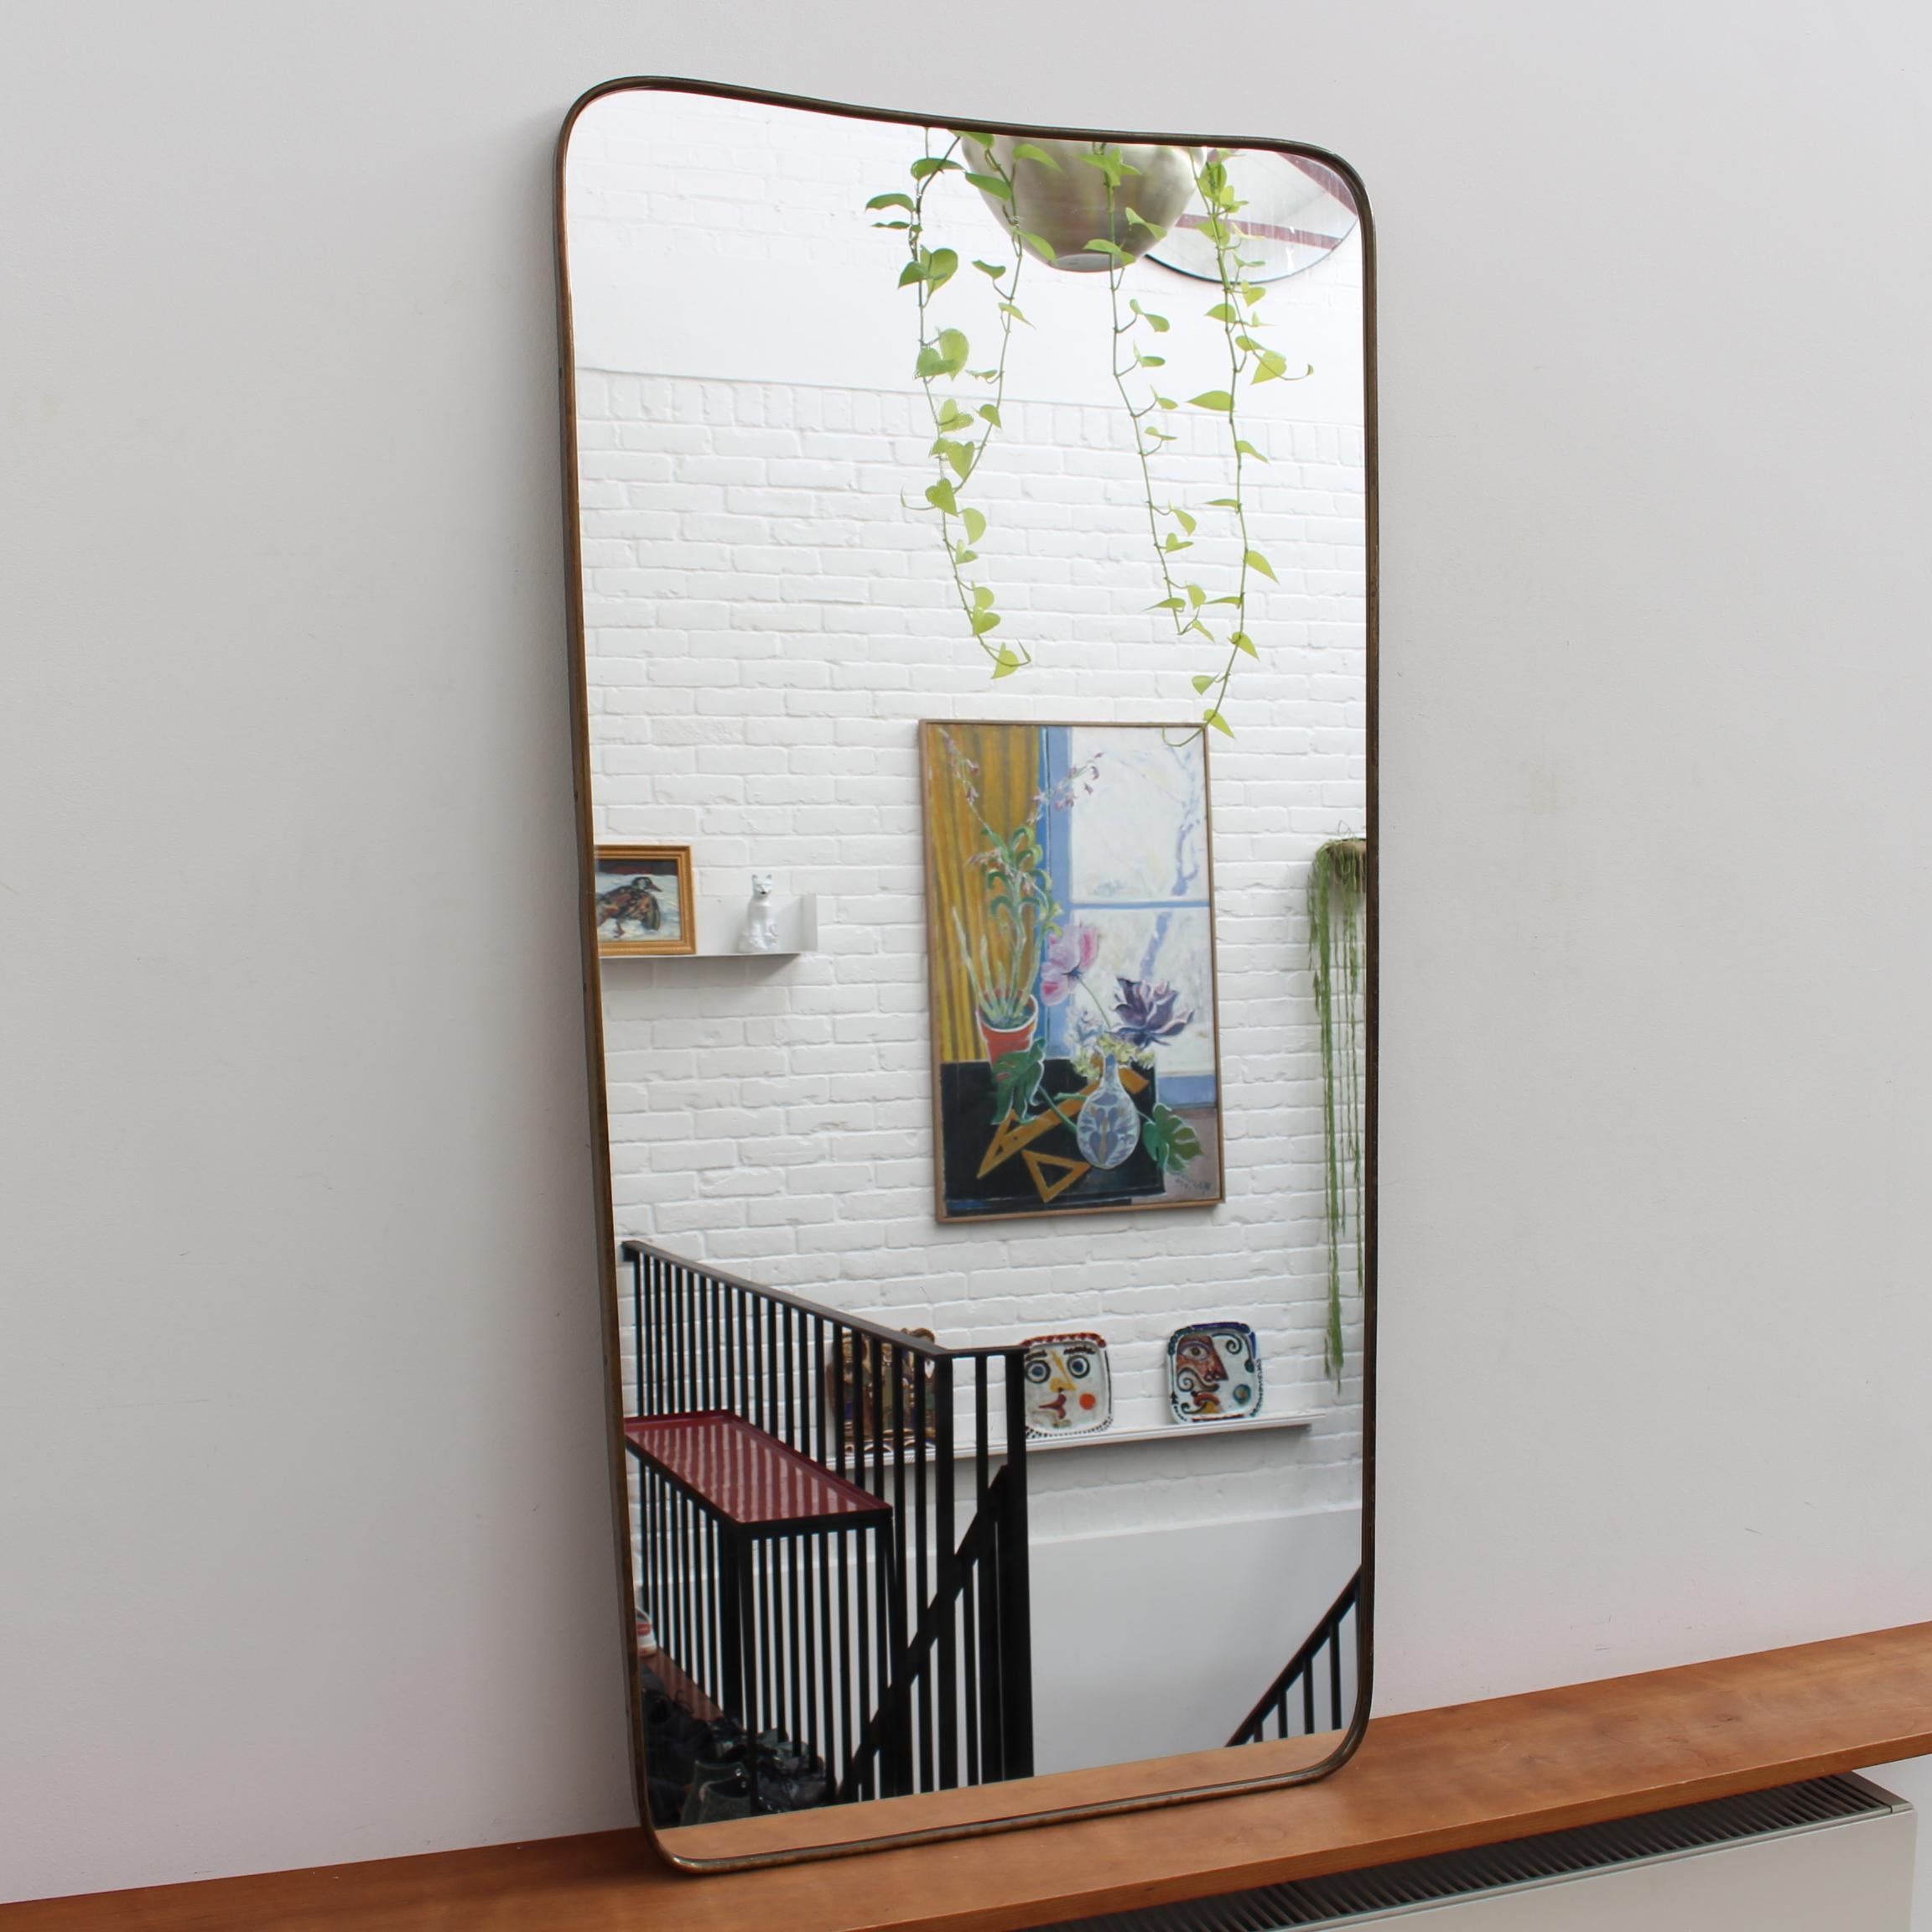 Mid-century large Italian wall mirror with brass frame (circa 1950s). The mirror is classically-shaped and distinctive in a Modern style. It is in good overall condition presenting just a small scratch on the glass giving it that extra vintage feel